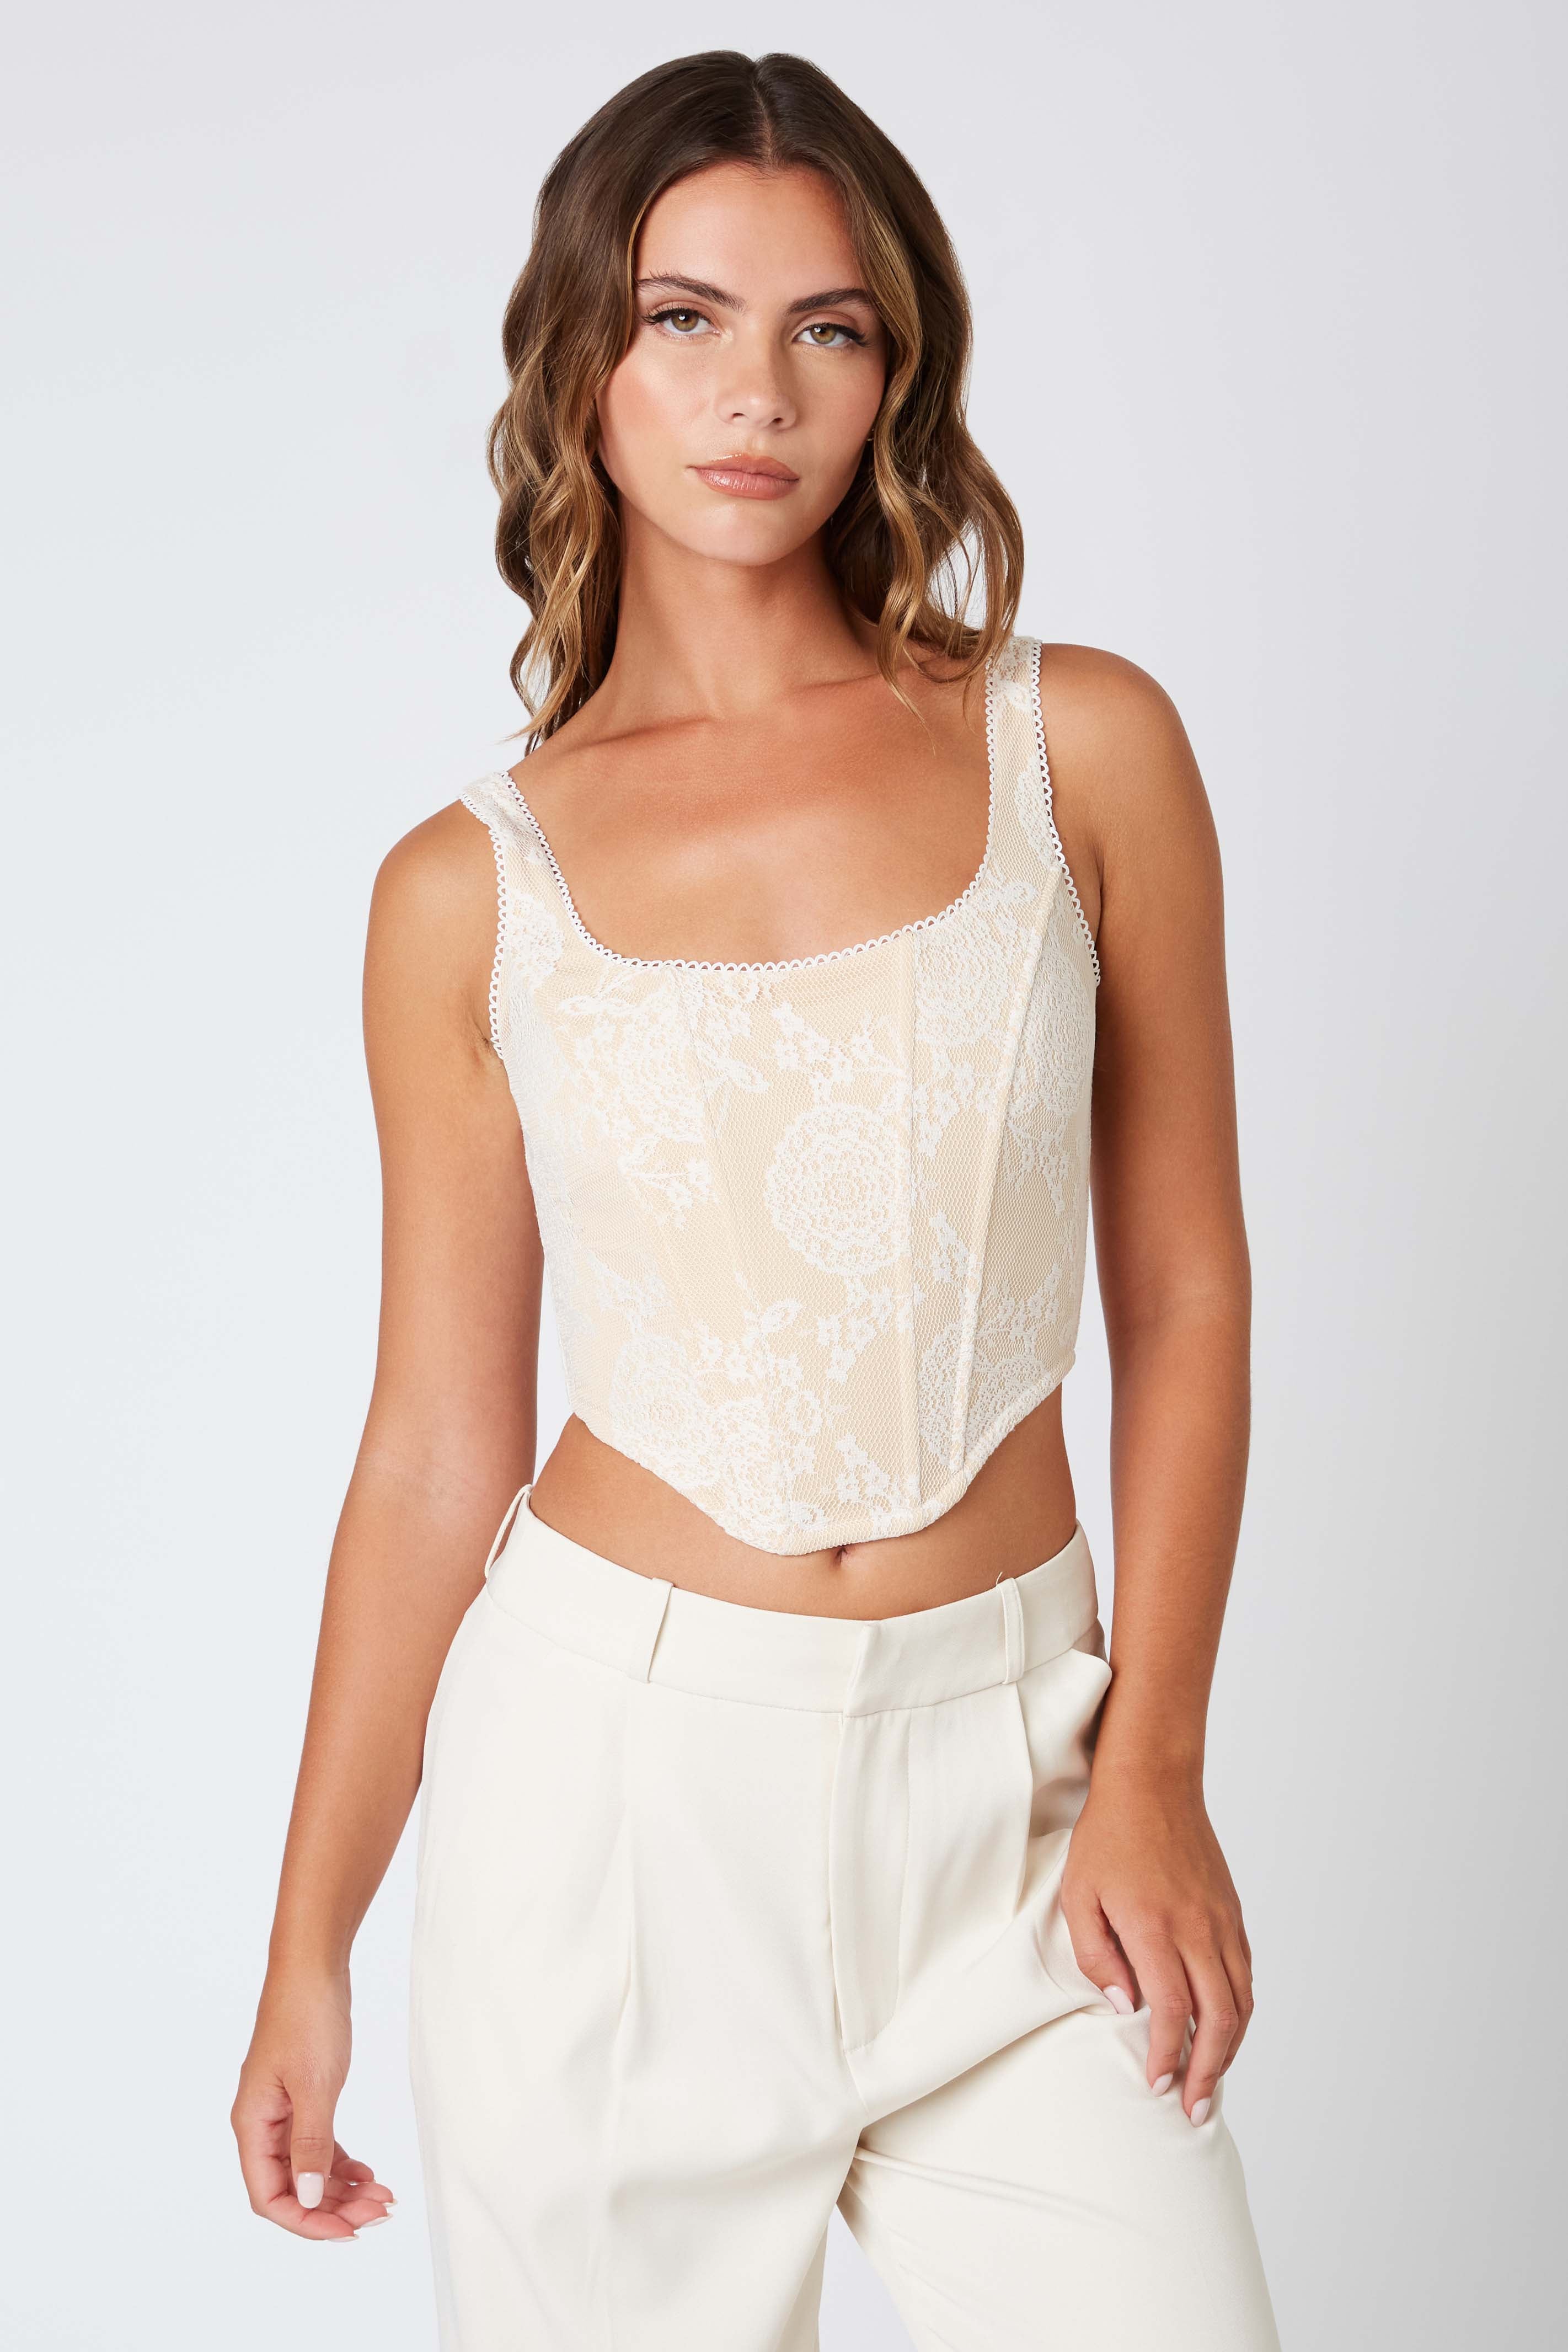 Knit Lace Corset Top in Ivory Front View